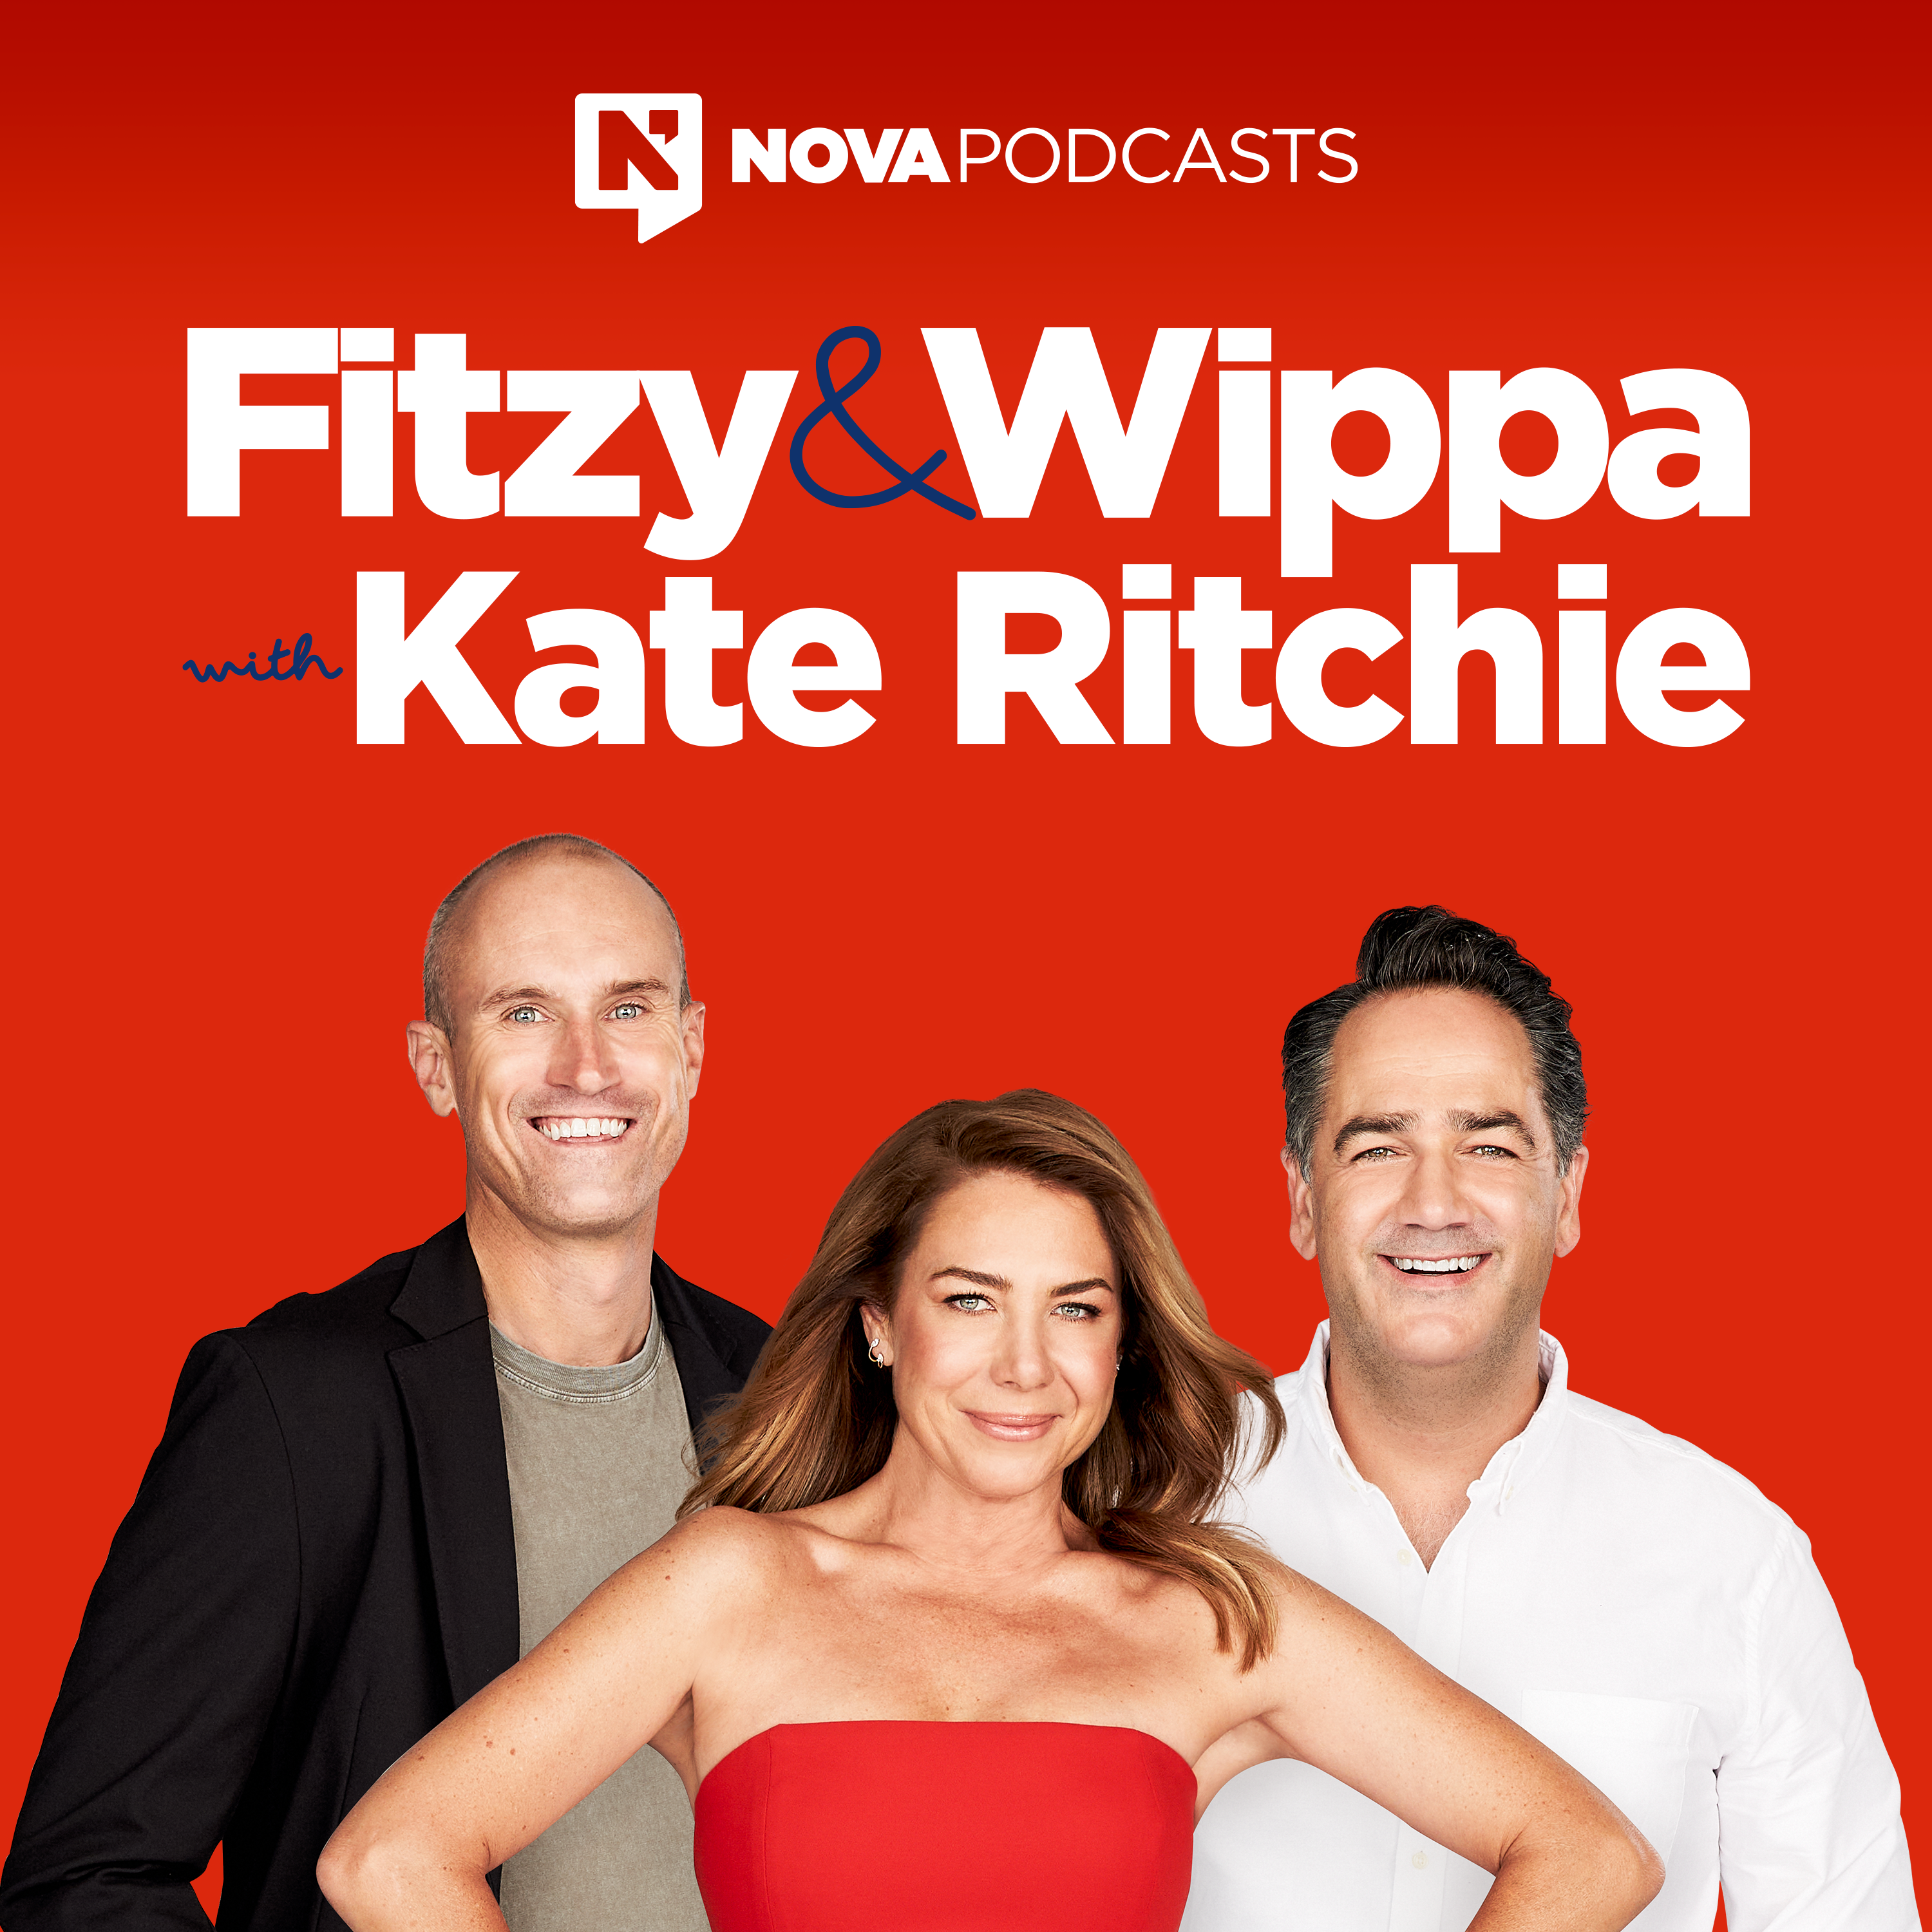 BONUS: Who F-d Up The Most This Week, Fitzy Or Wippa? (Recap)